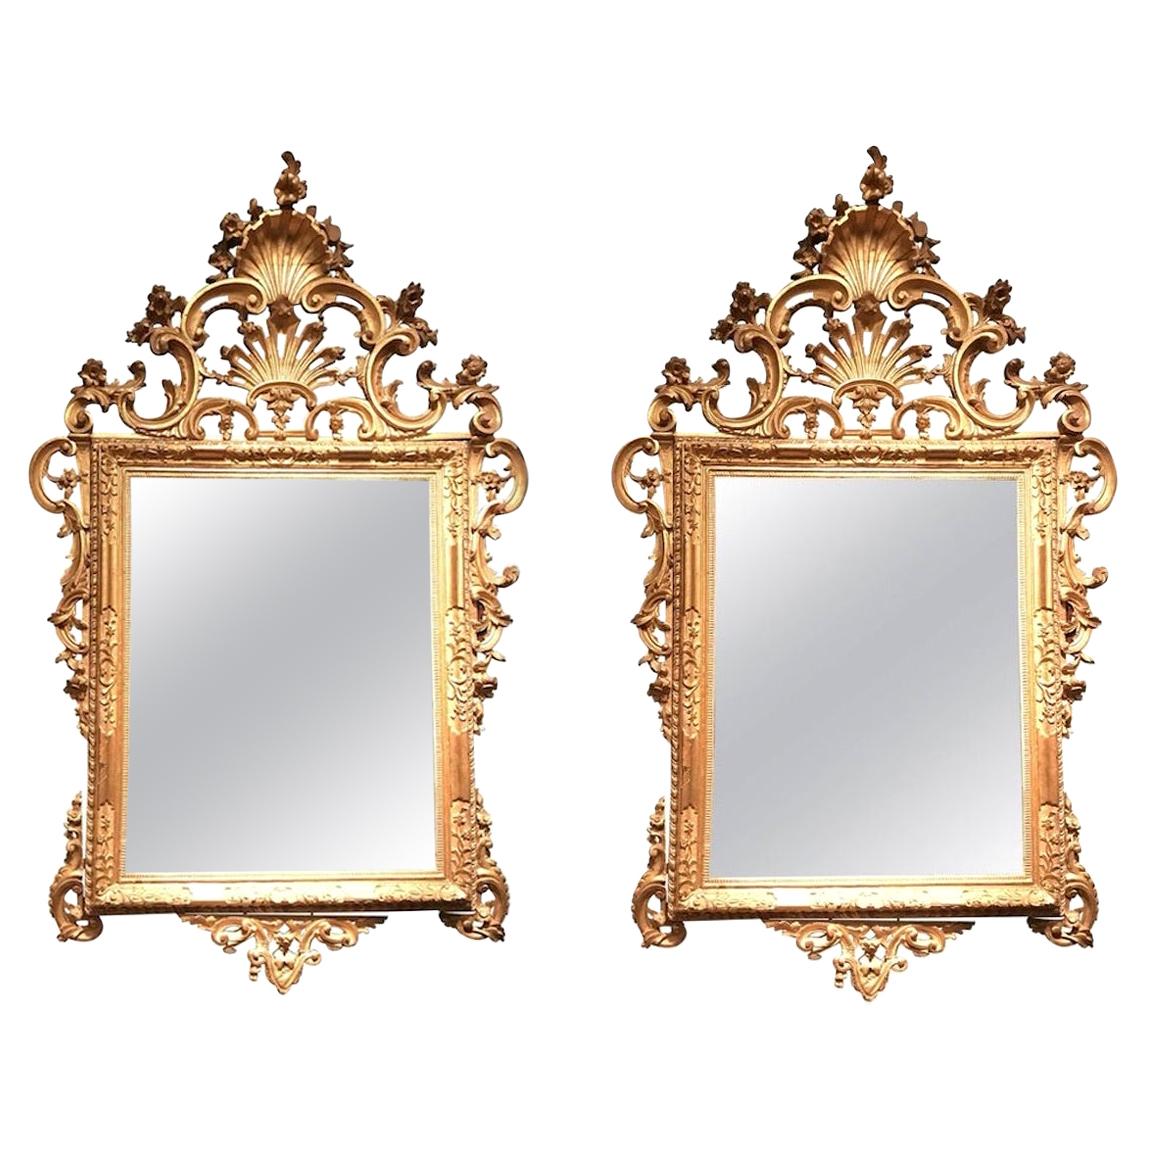 Pair of Venetian Carved and Giltwood Mirrors, Italy, circa 1750